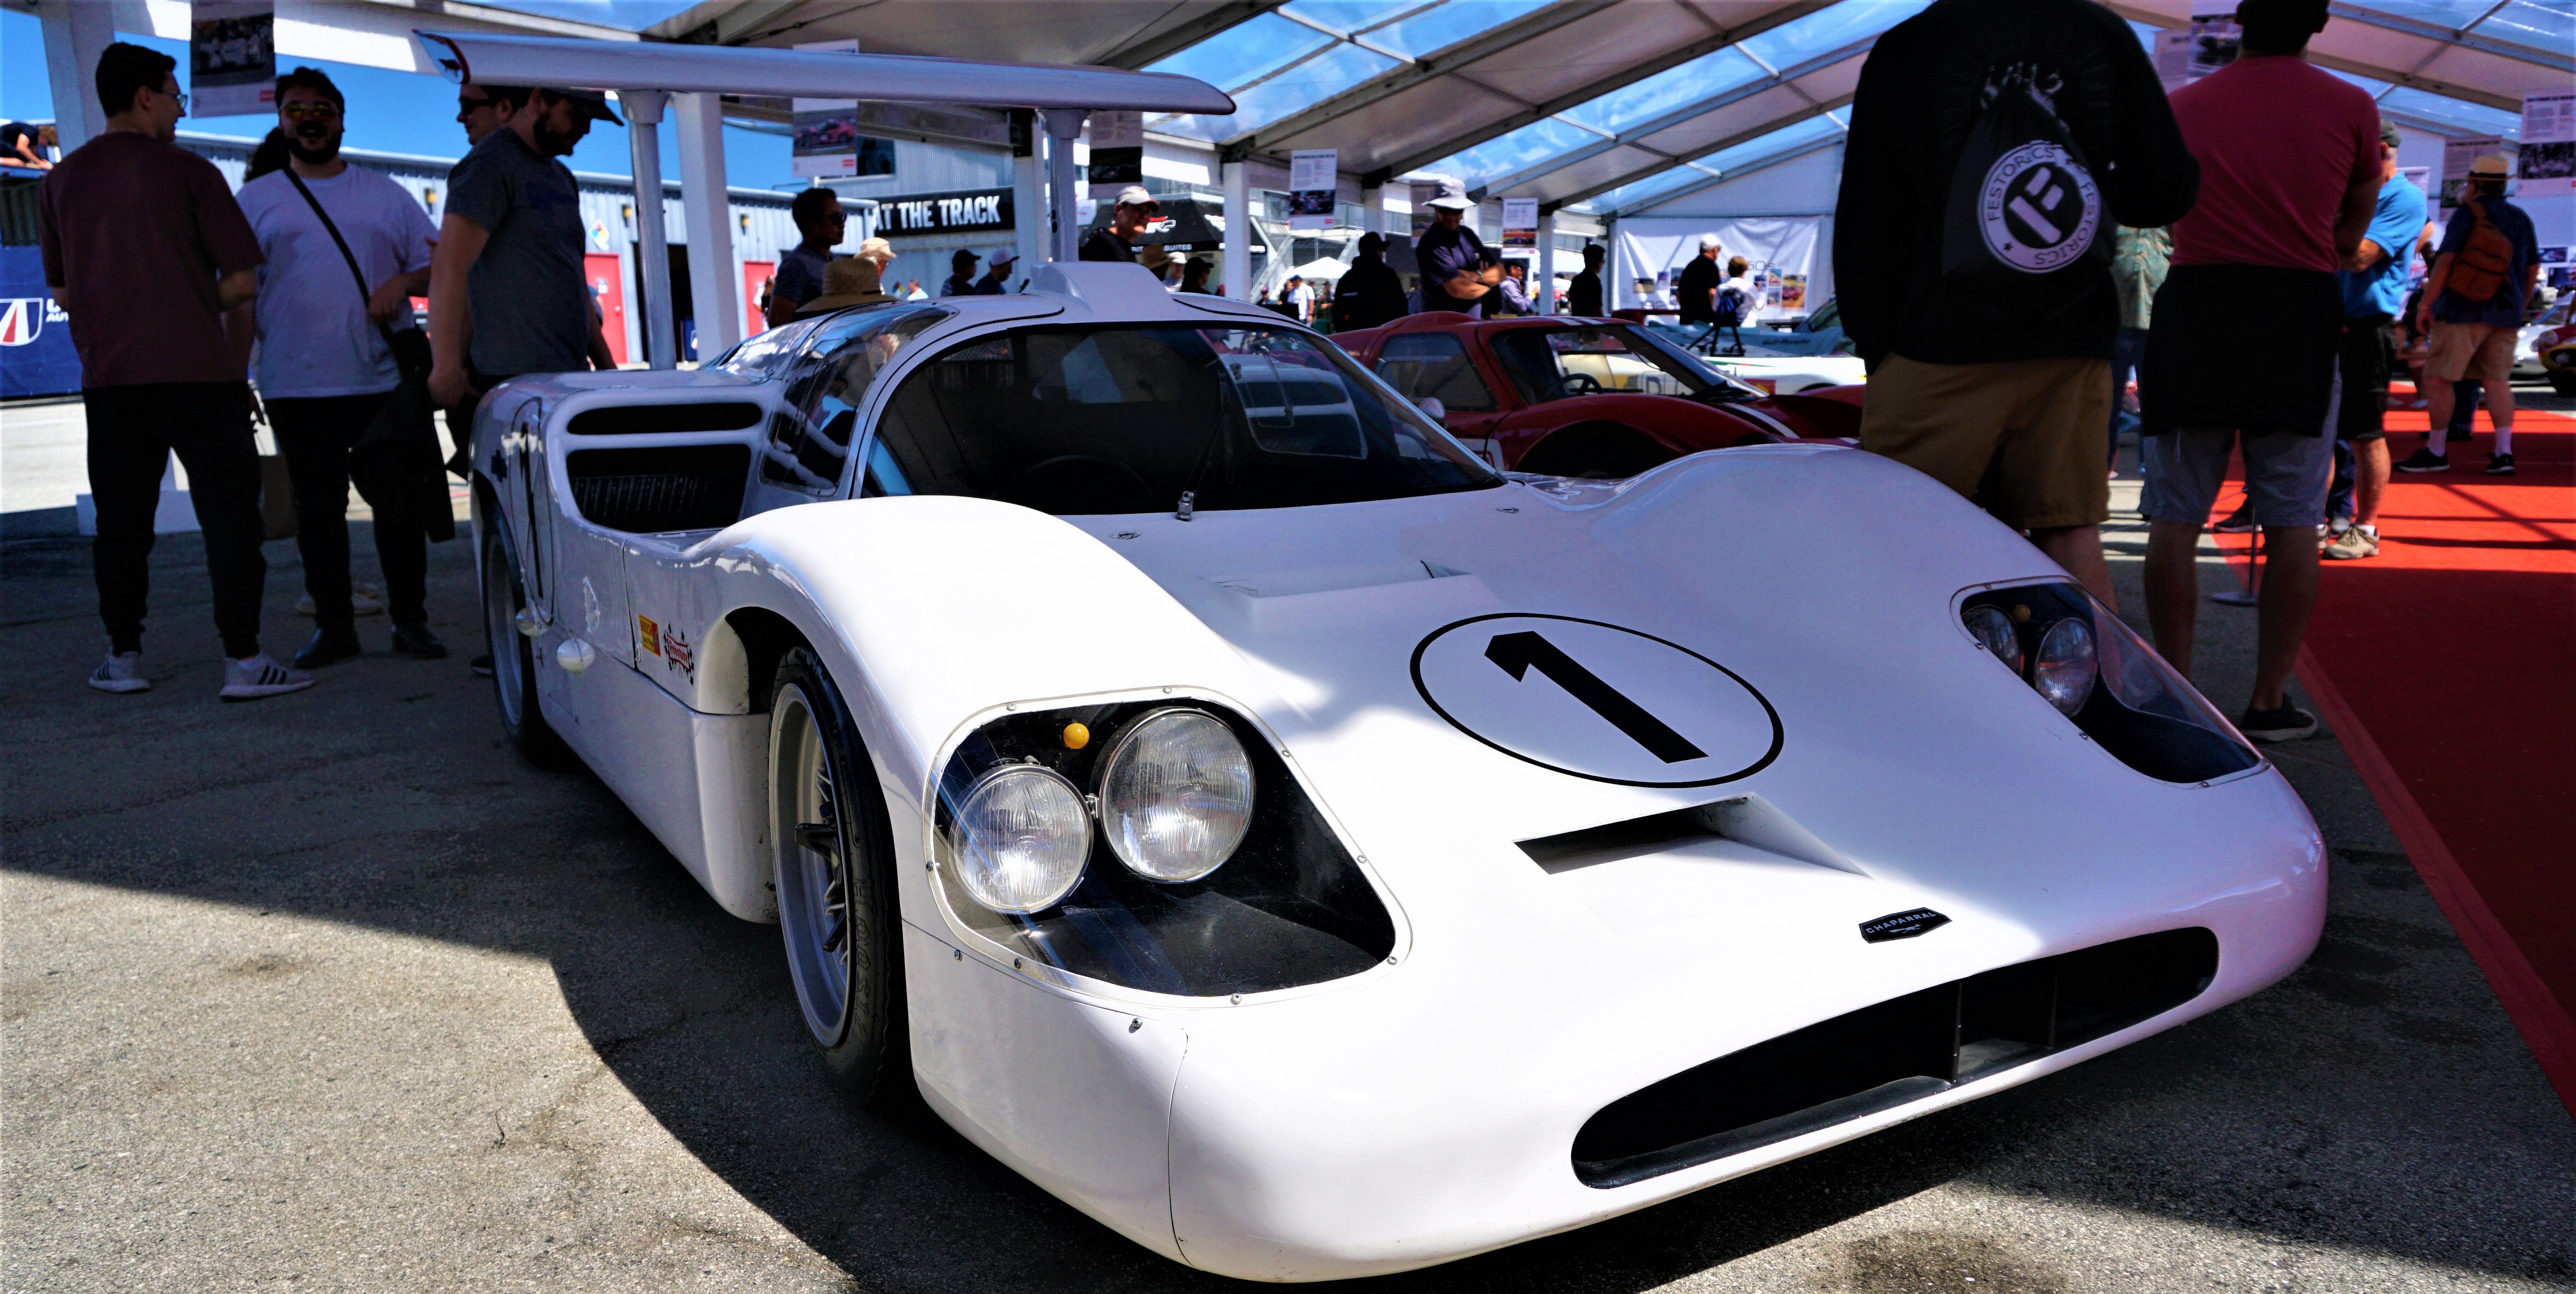 'Le Mans Legends at Laguna Seca' Celebrates 100 Years of the 24 Hours